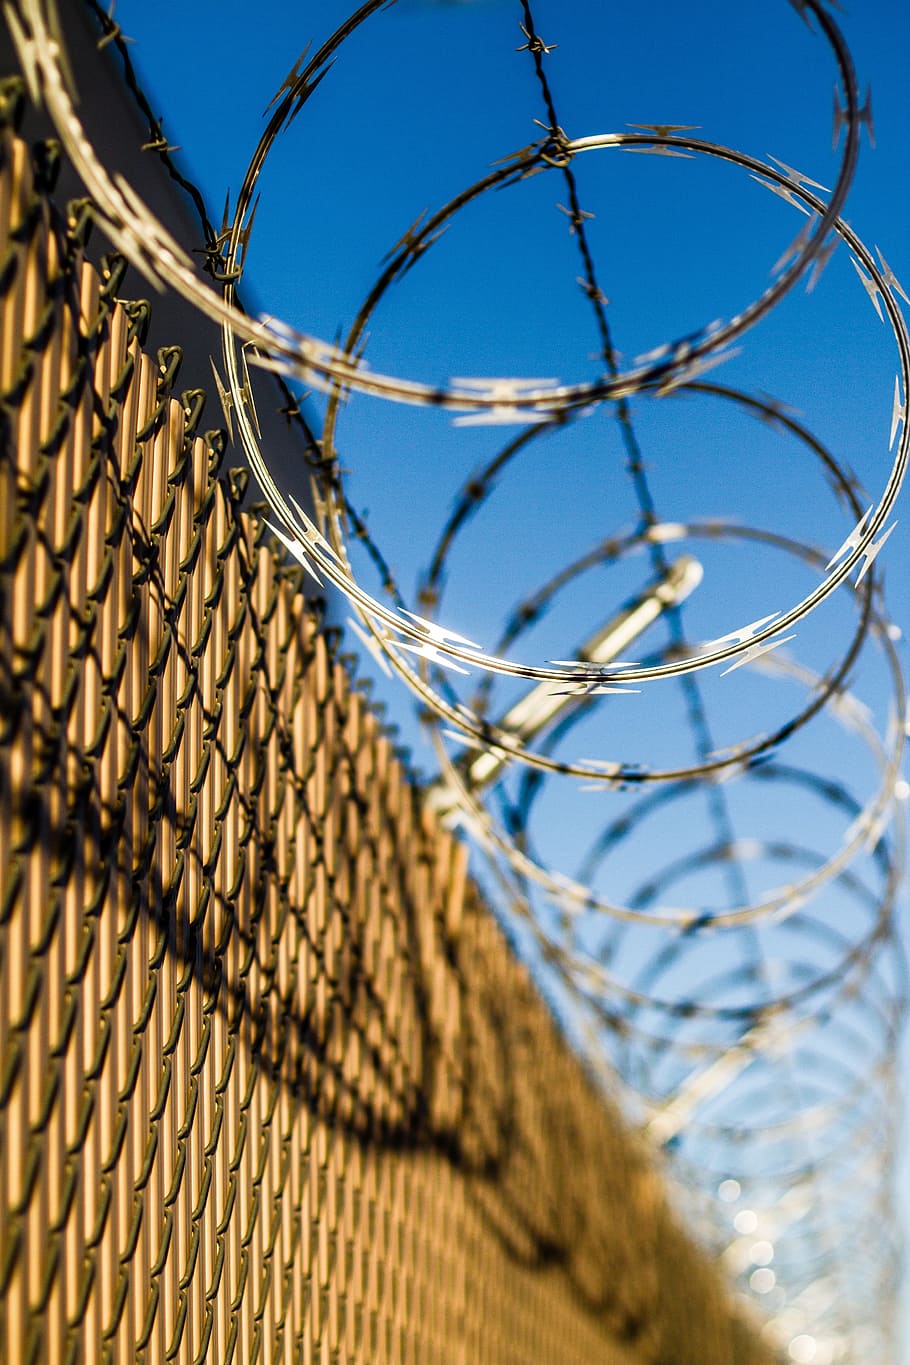 chain link fence, barbwire, concertina wire, fence, concertina, barbed, security, prison, protection, razor